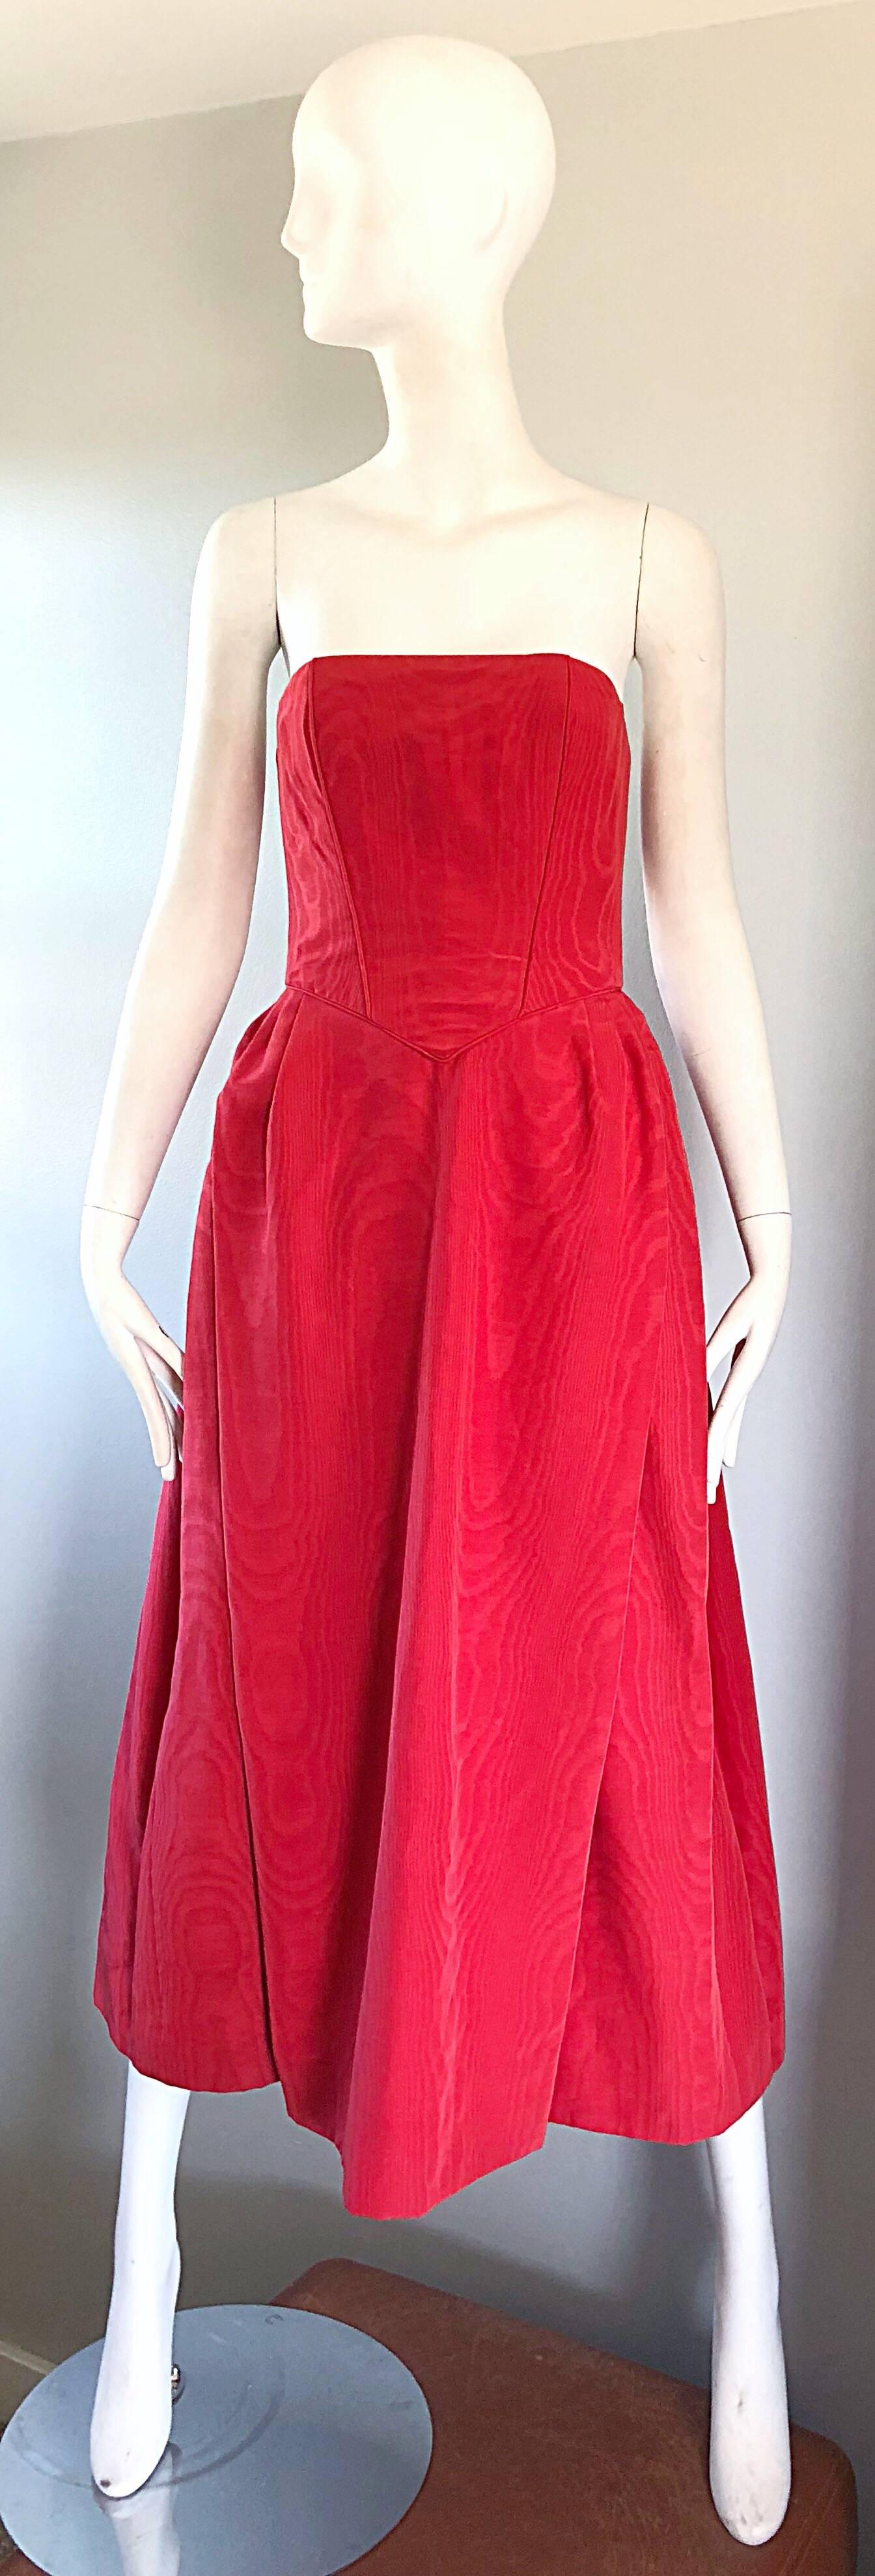 Stunning late 1970s BOB MACKIE for NEIMAN MARCUS lipstick red silk moire strapless evening dress! Perfectly tailored corset bodice, and full free skirt are extremely flattering, and a fun ode to the 1950s. Luxurious silk moire is absolutely gorgeous